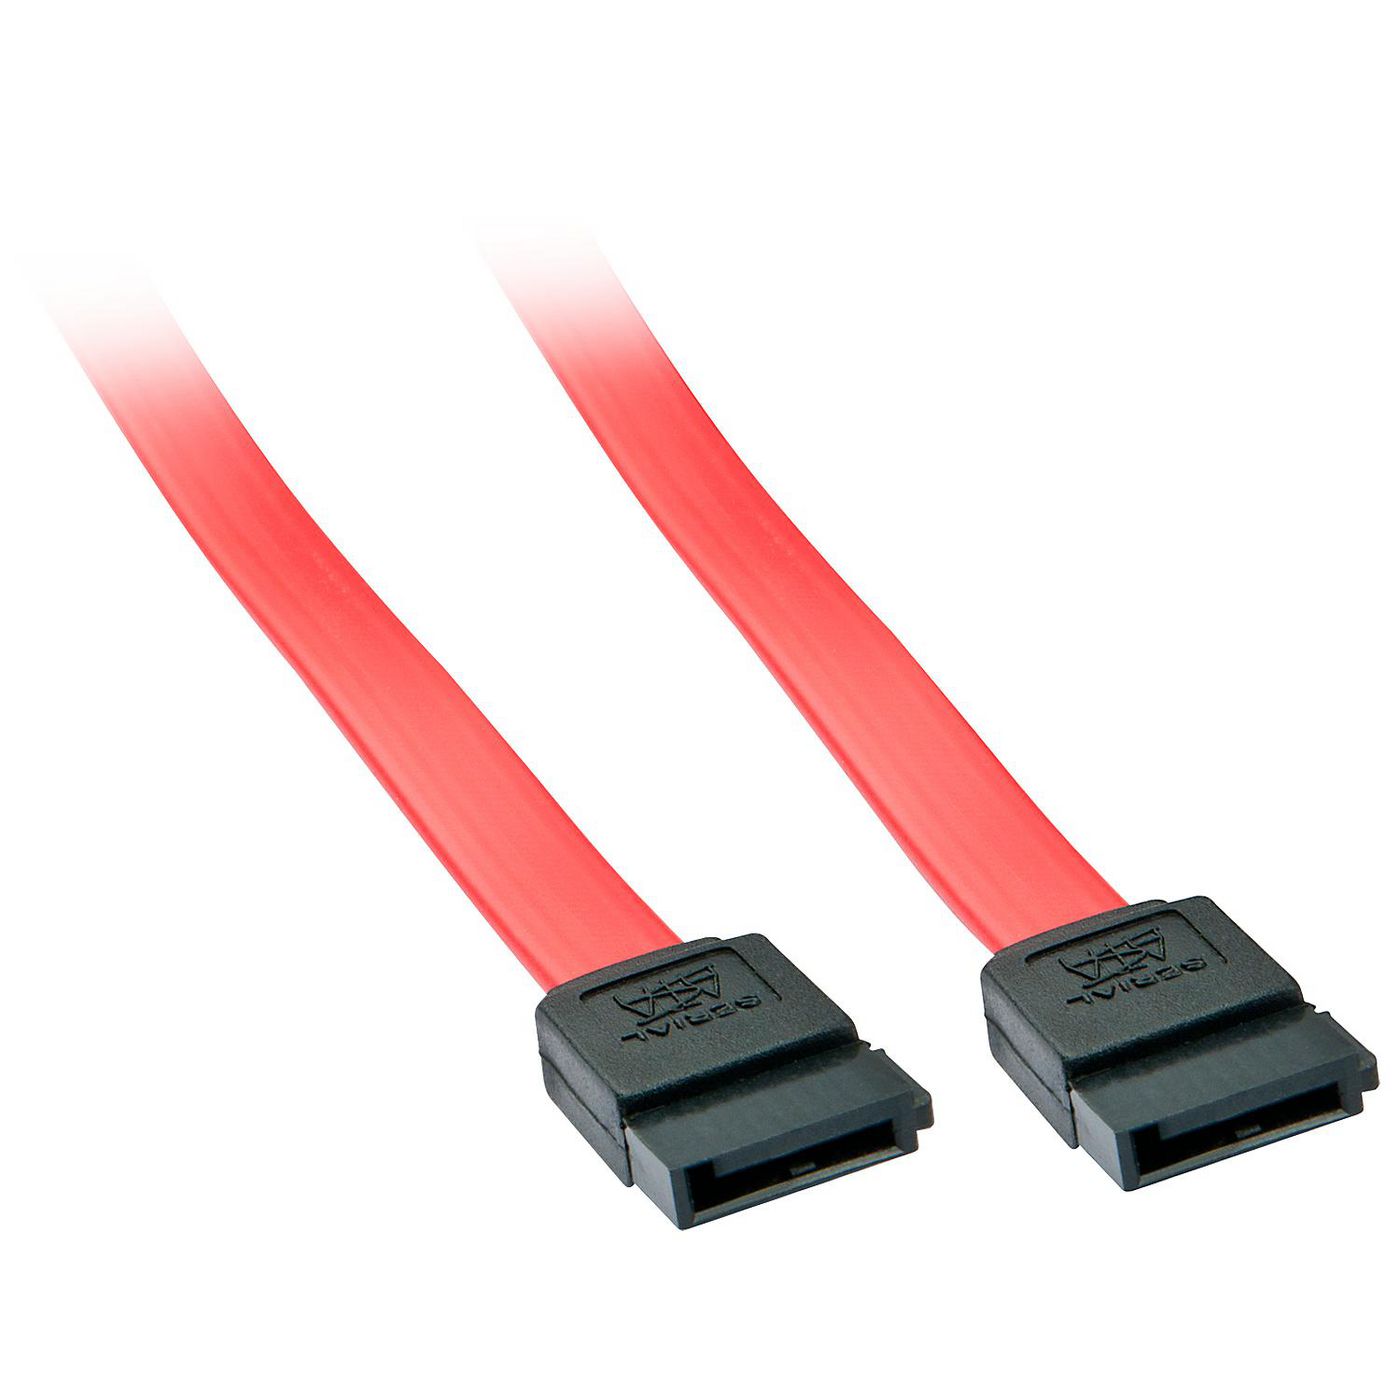 Lindy 33325 W128456659 Int. SATA III Cable, Red, 0.7m 